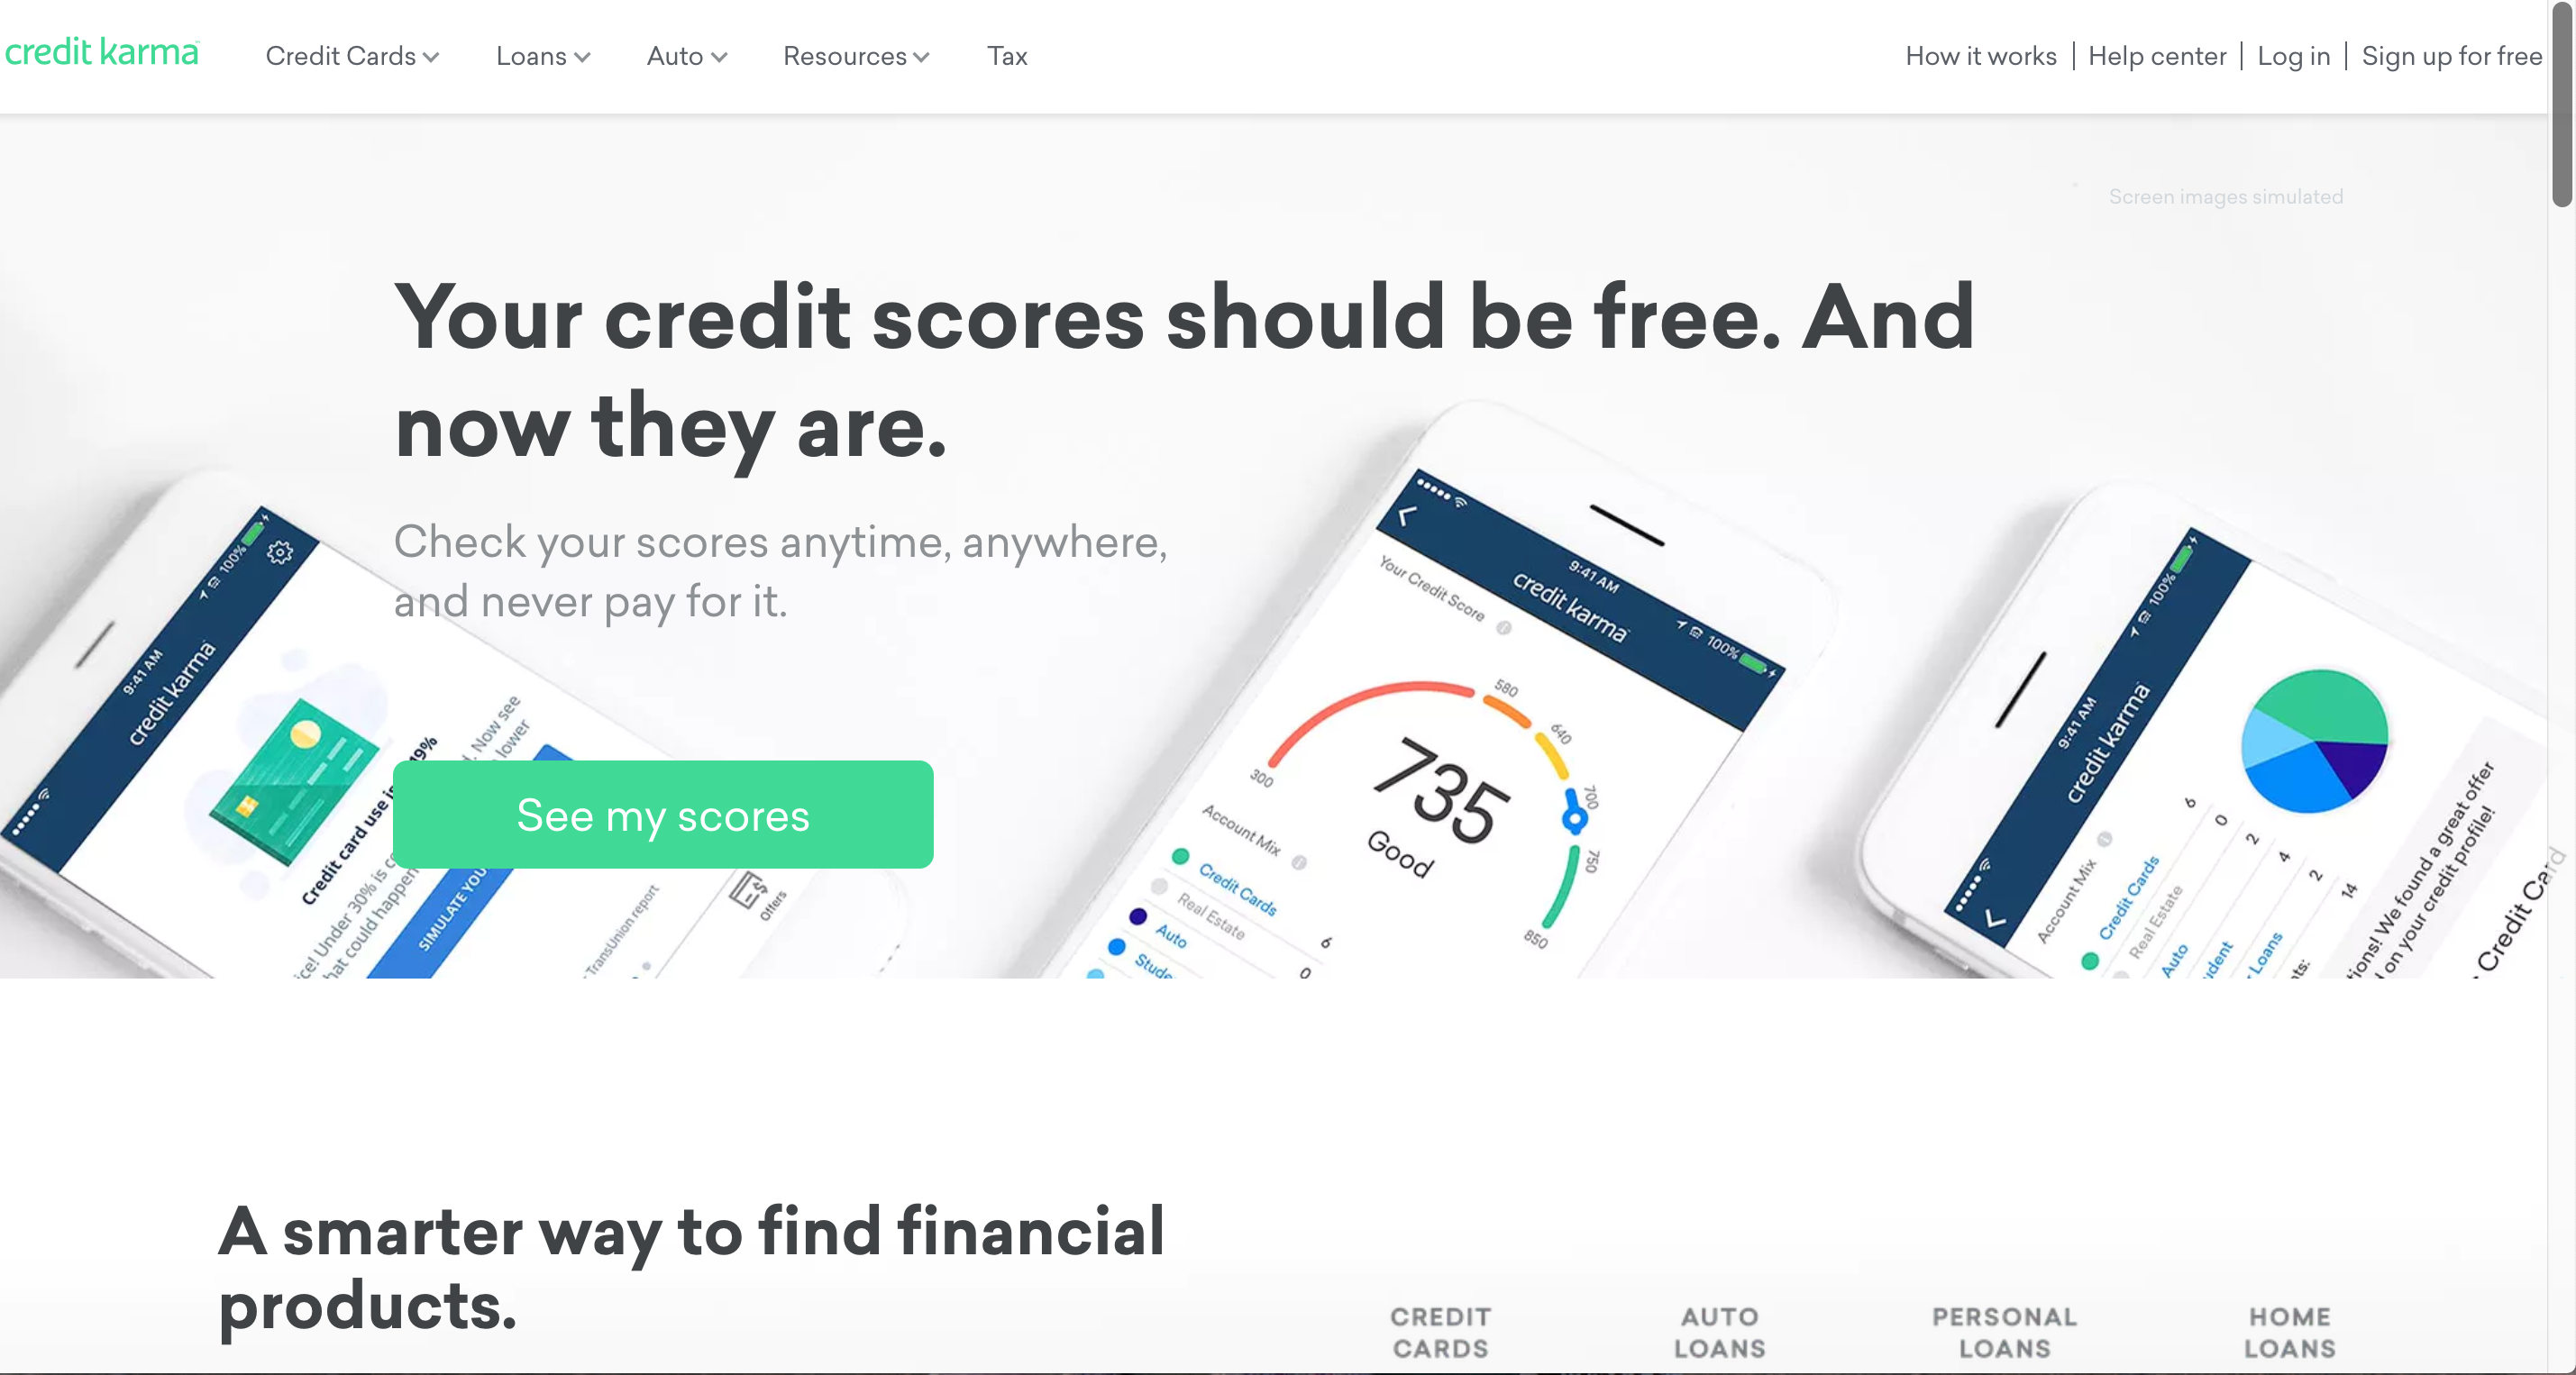 Checking your credit score should always be free. Here